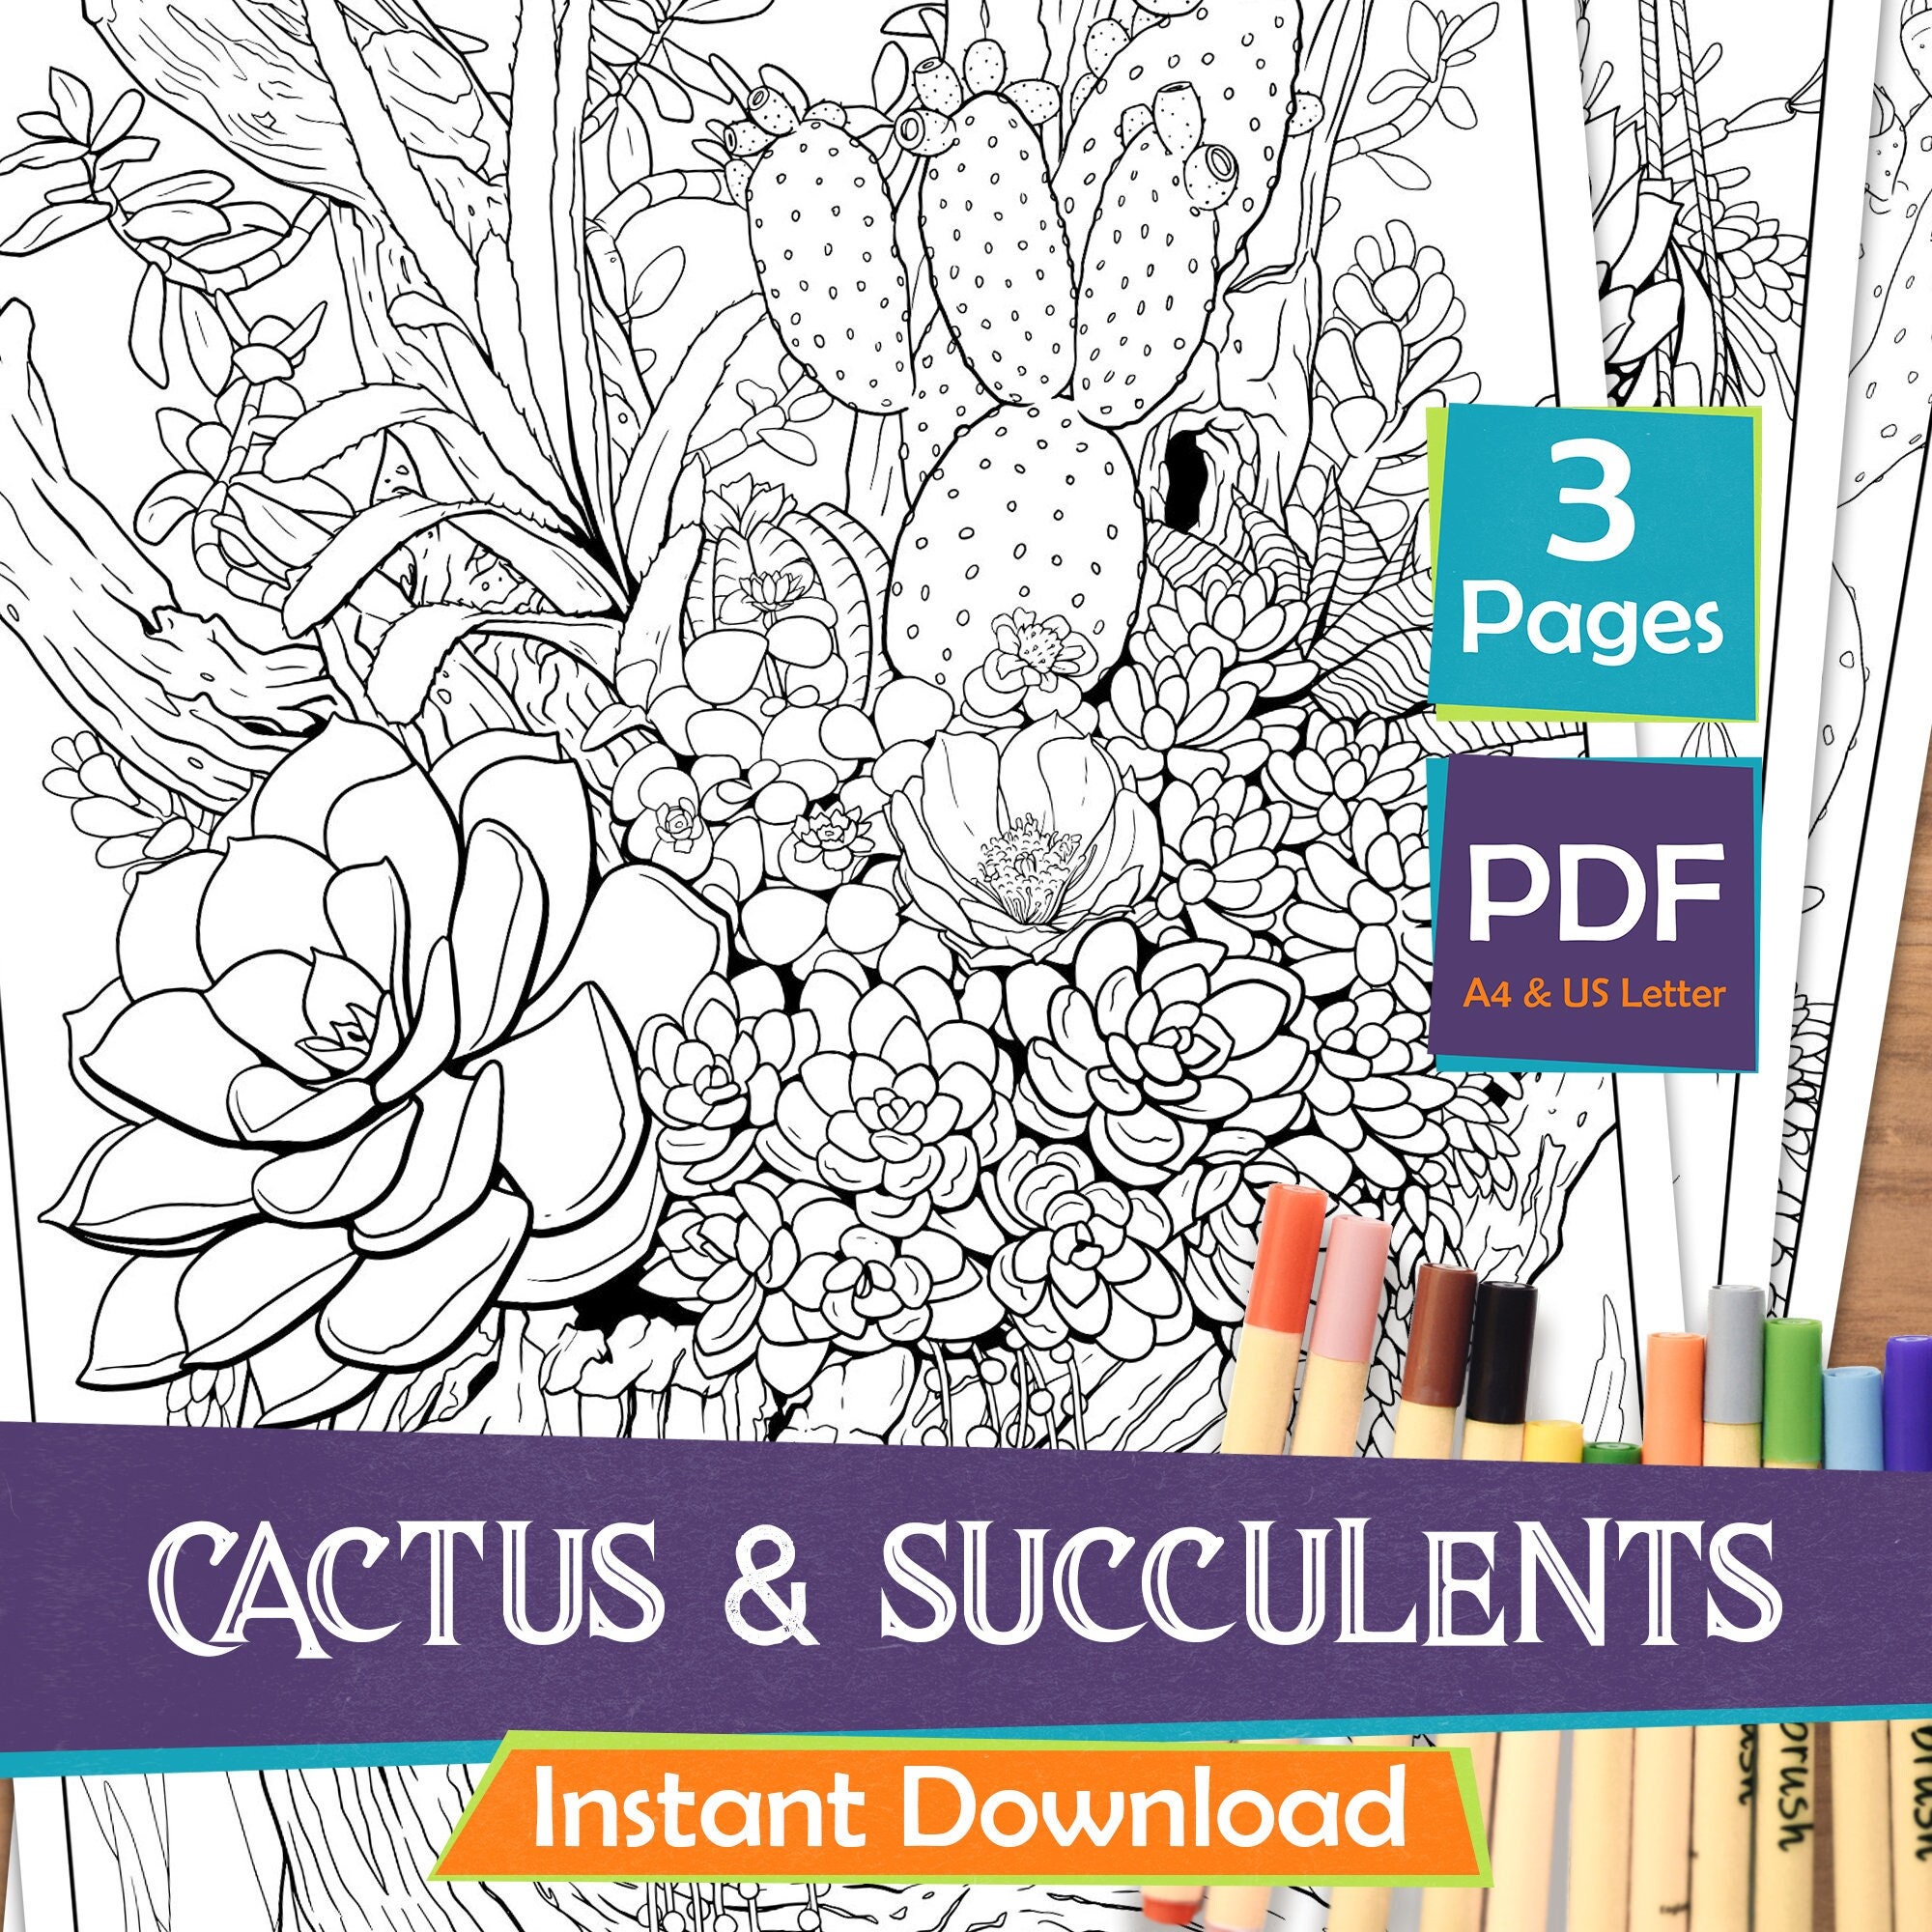 Printable Color Your Own Tween/Teen Bookmarks. Instant Digital Download. 4  DIY Coloring Bookmarks- Boba, Cactus, Rainbow, and Peace